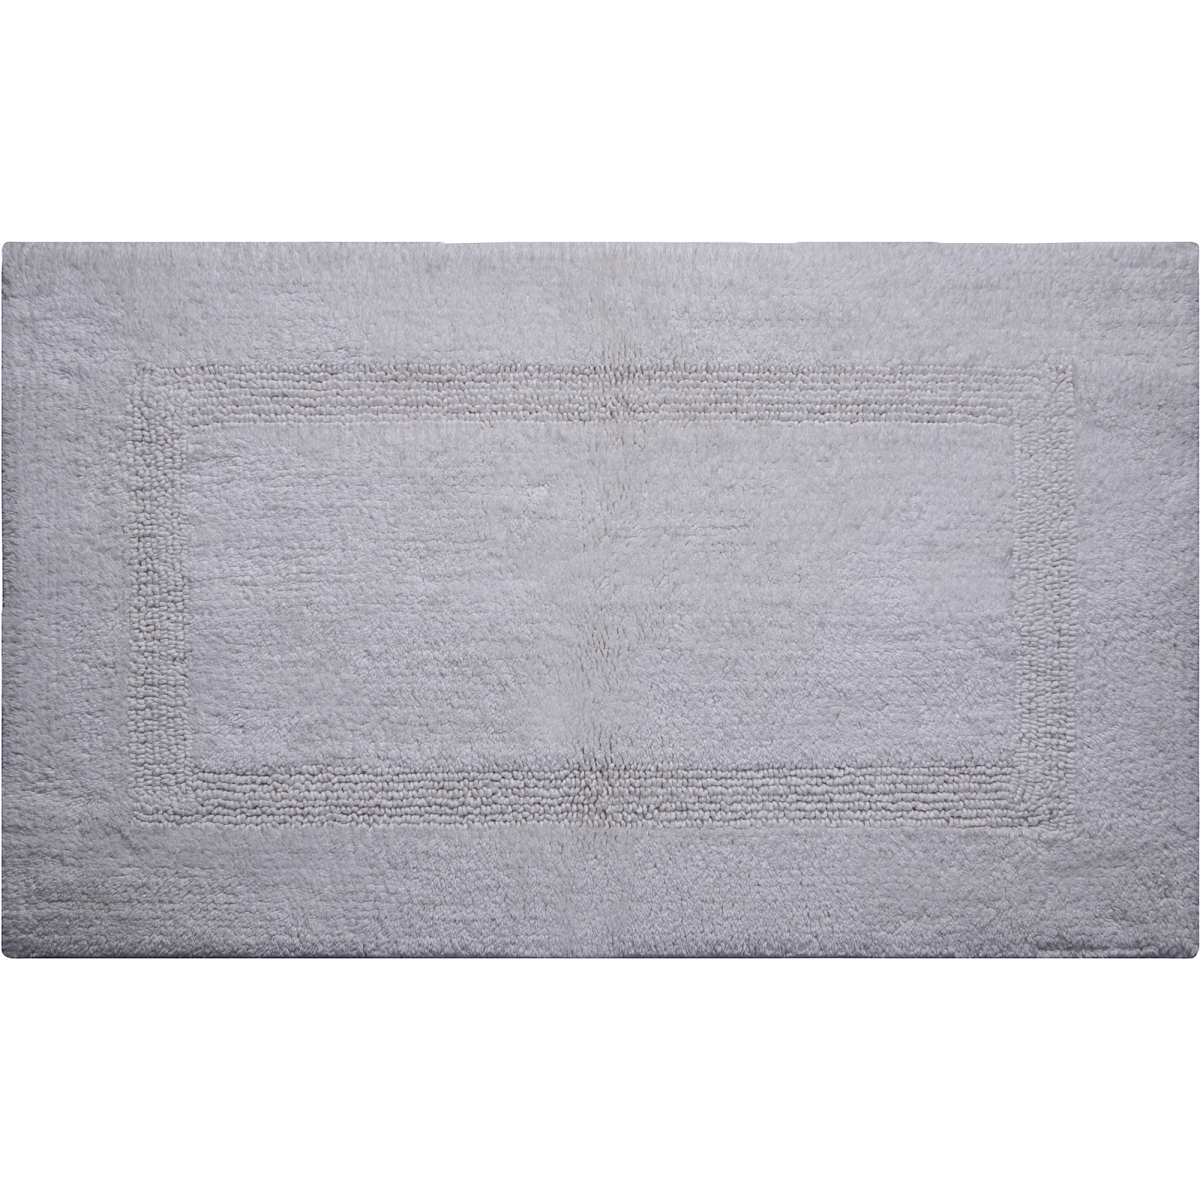 Picture of Better Trends BALU1724GR 17 x 24 in. Lux Reversible Bath Rug, Grey - Set of 2